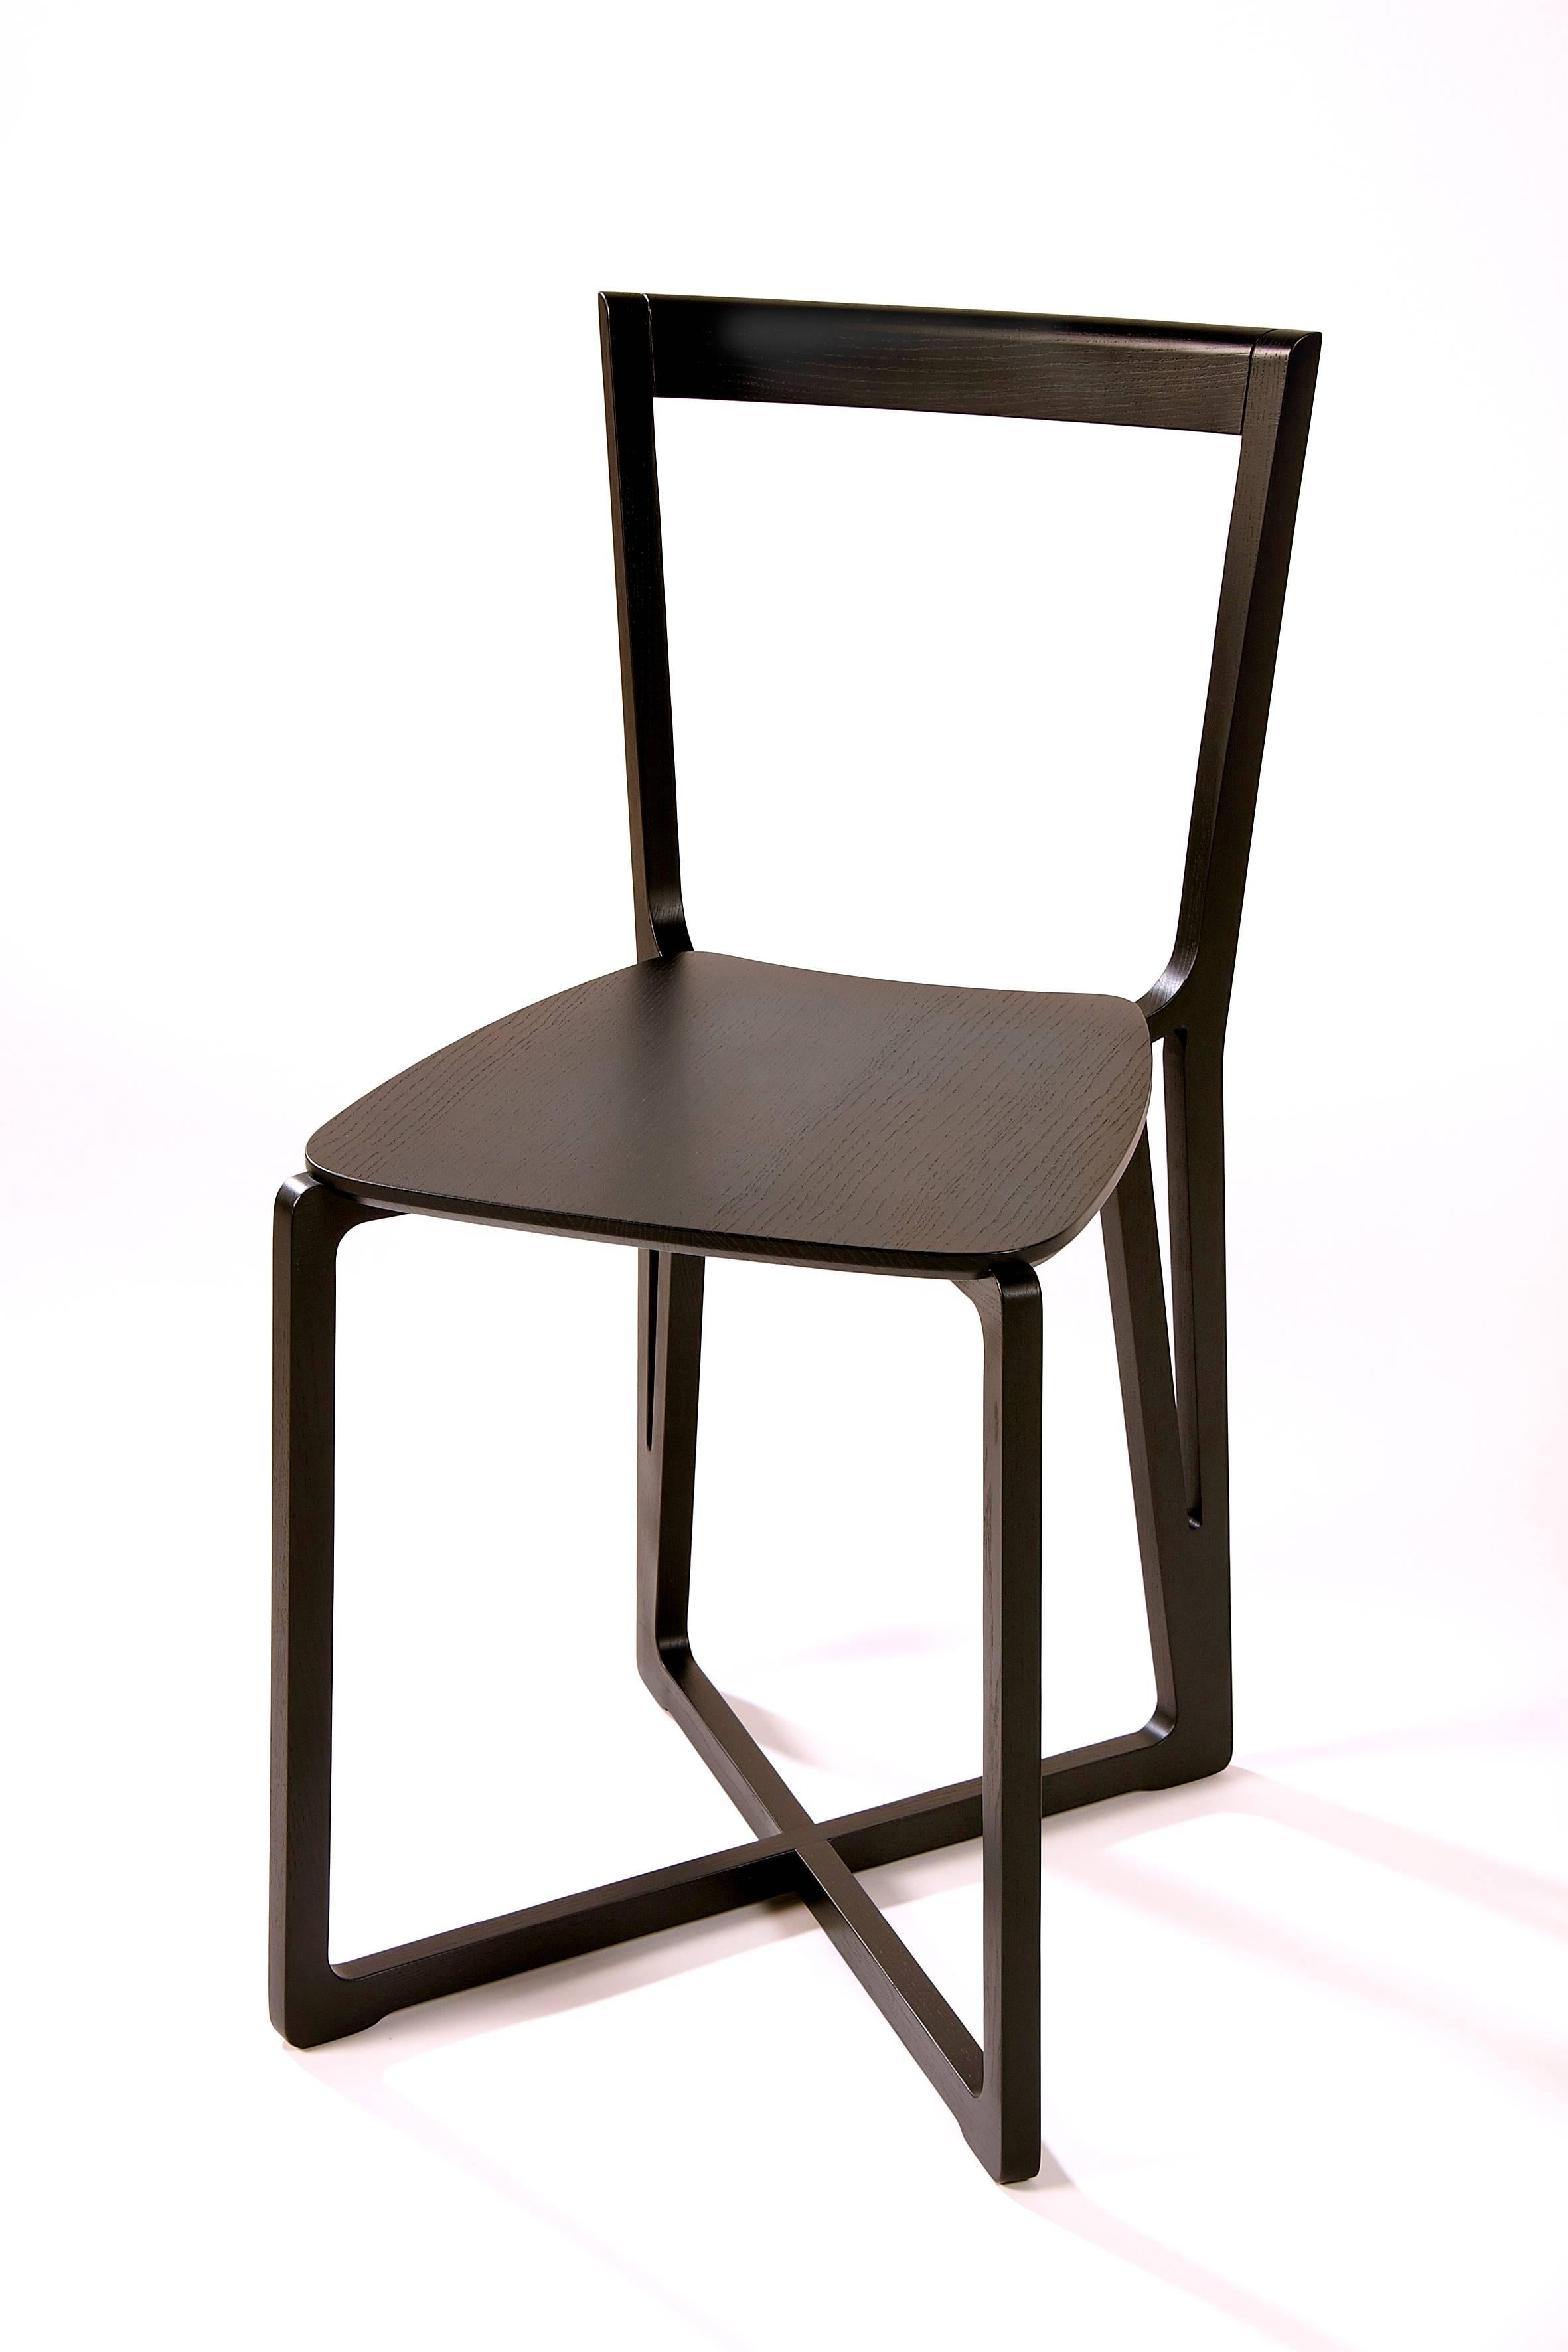 A true design masterpiece, this chair which was created in the Northern Italy, has neither screws nor metal element whatsoever.
With a structure that is both sturdy yet simple at the same time, the assembly is elaborated by strategic interlocking